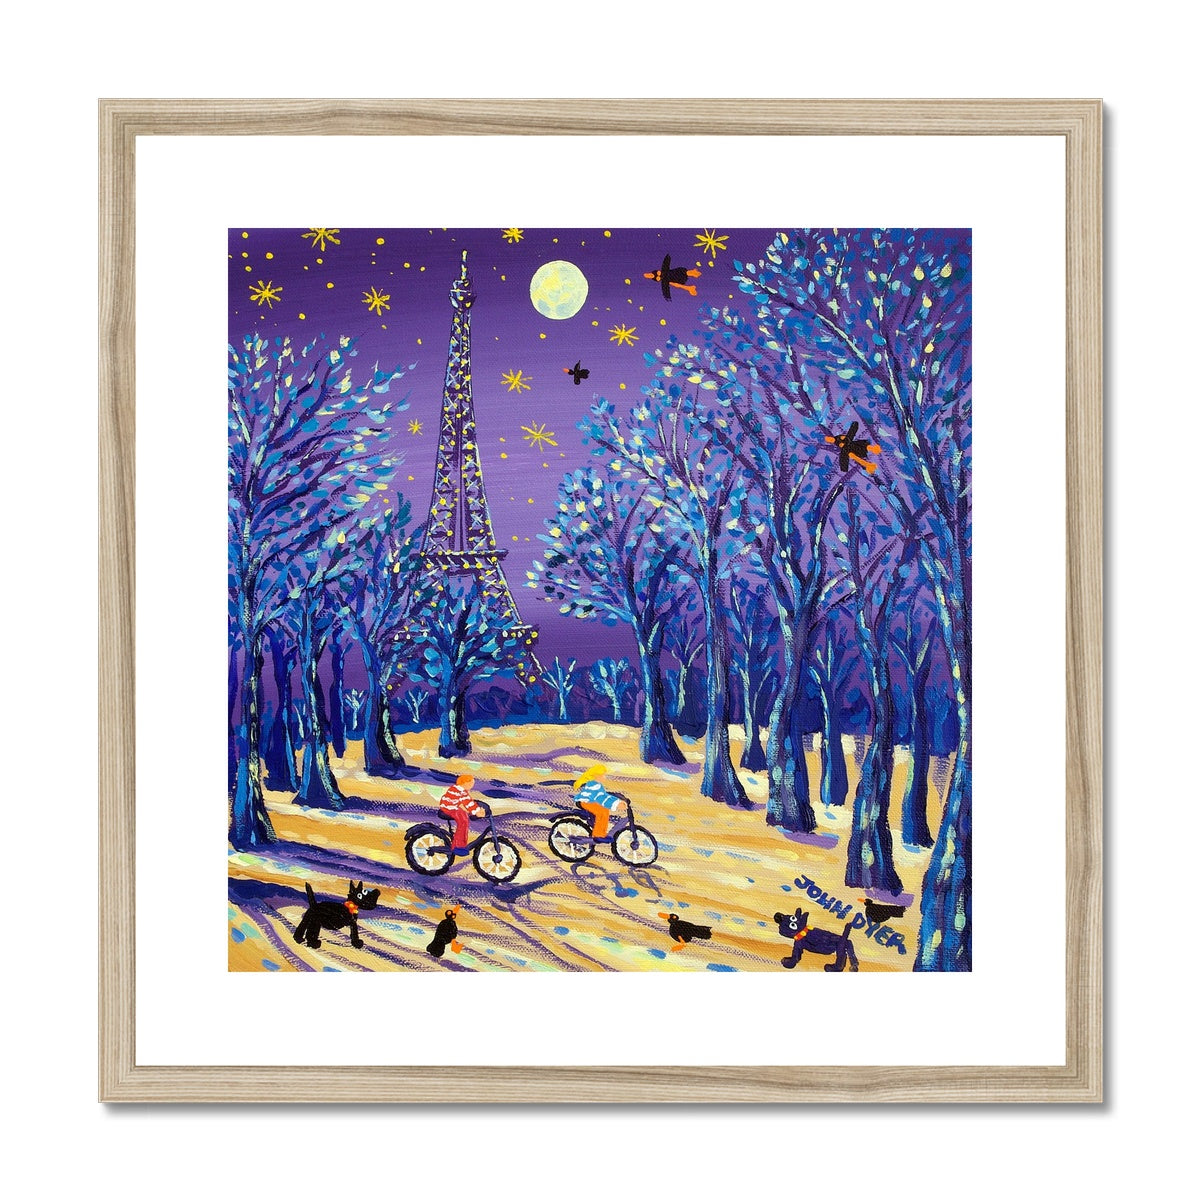 John Dyer Framed Open Edition French Art Print &#39;Cycling under the Moon, Eiffel Tower, Paris, France&#39; French Art Gallery